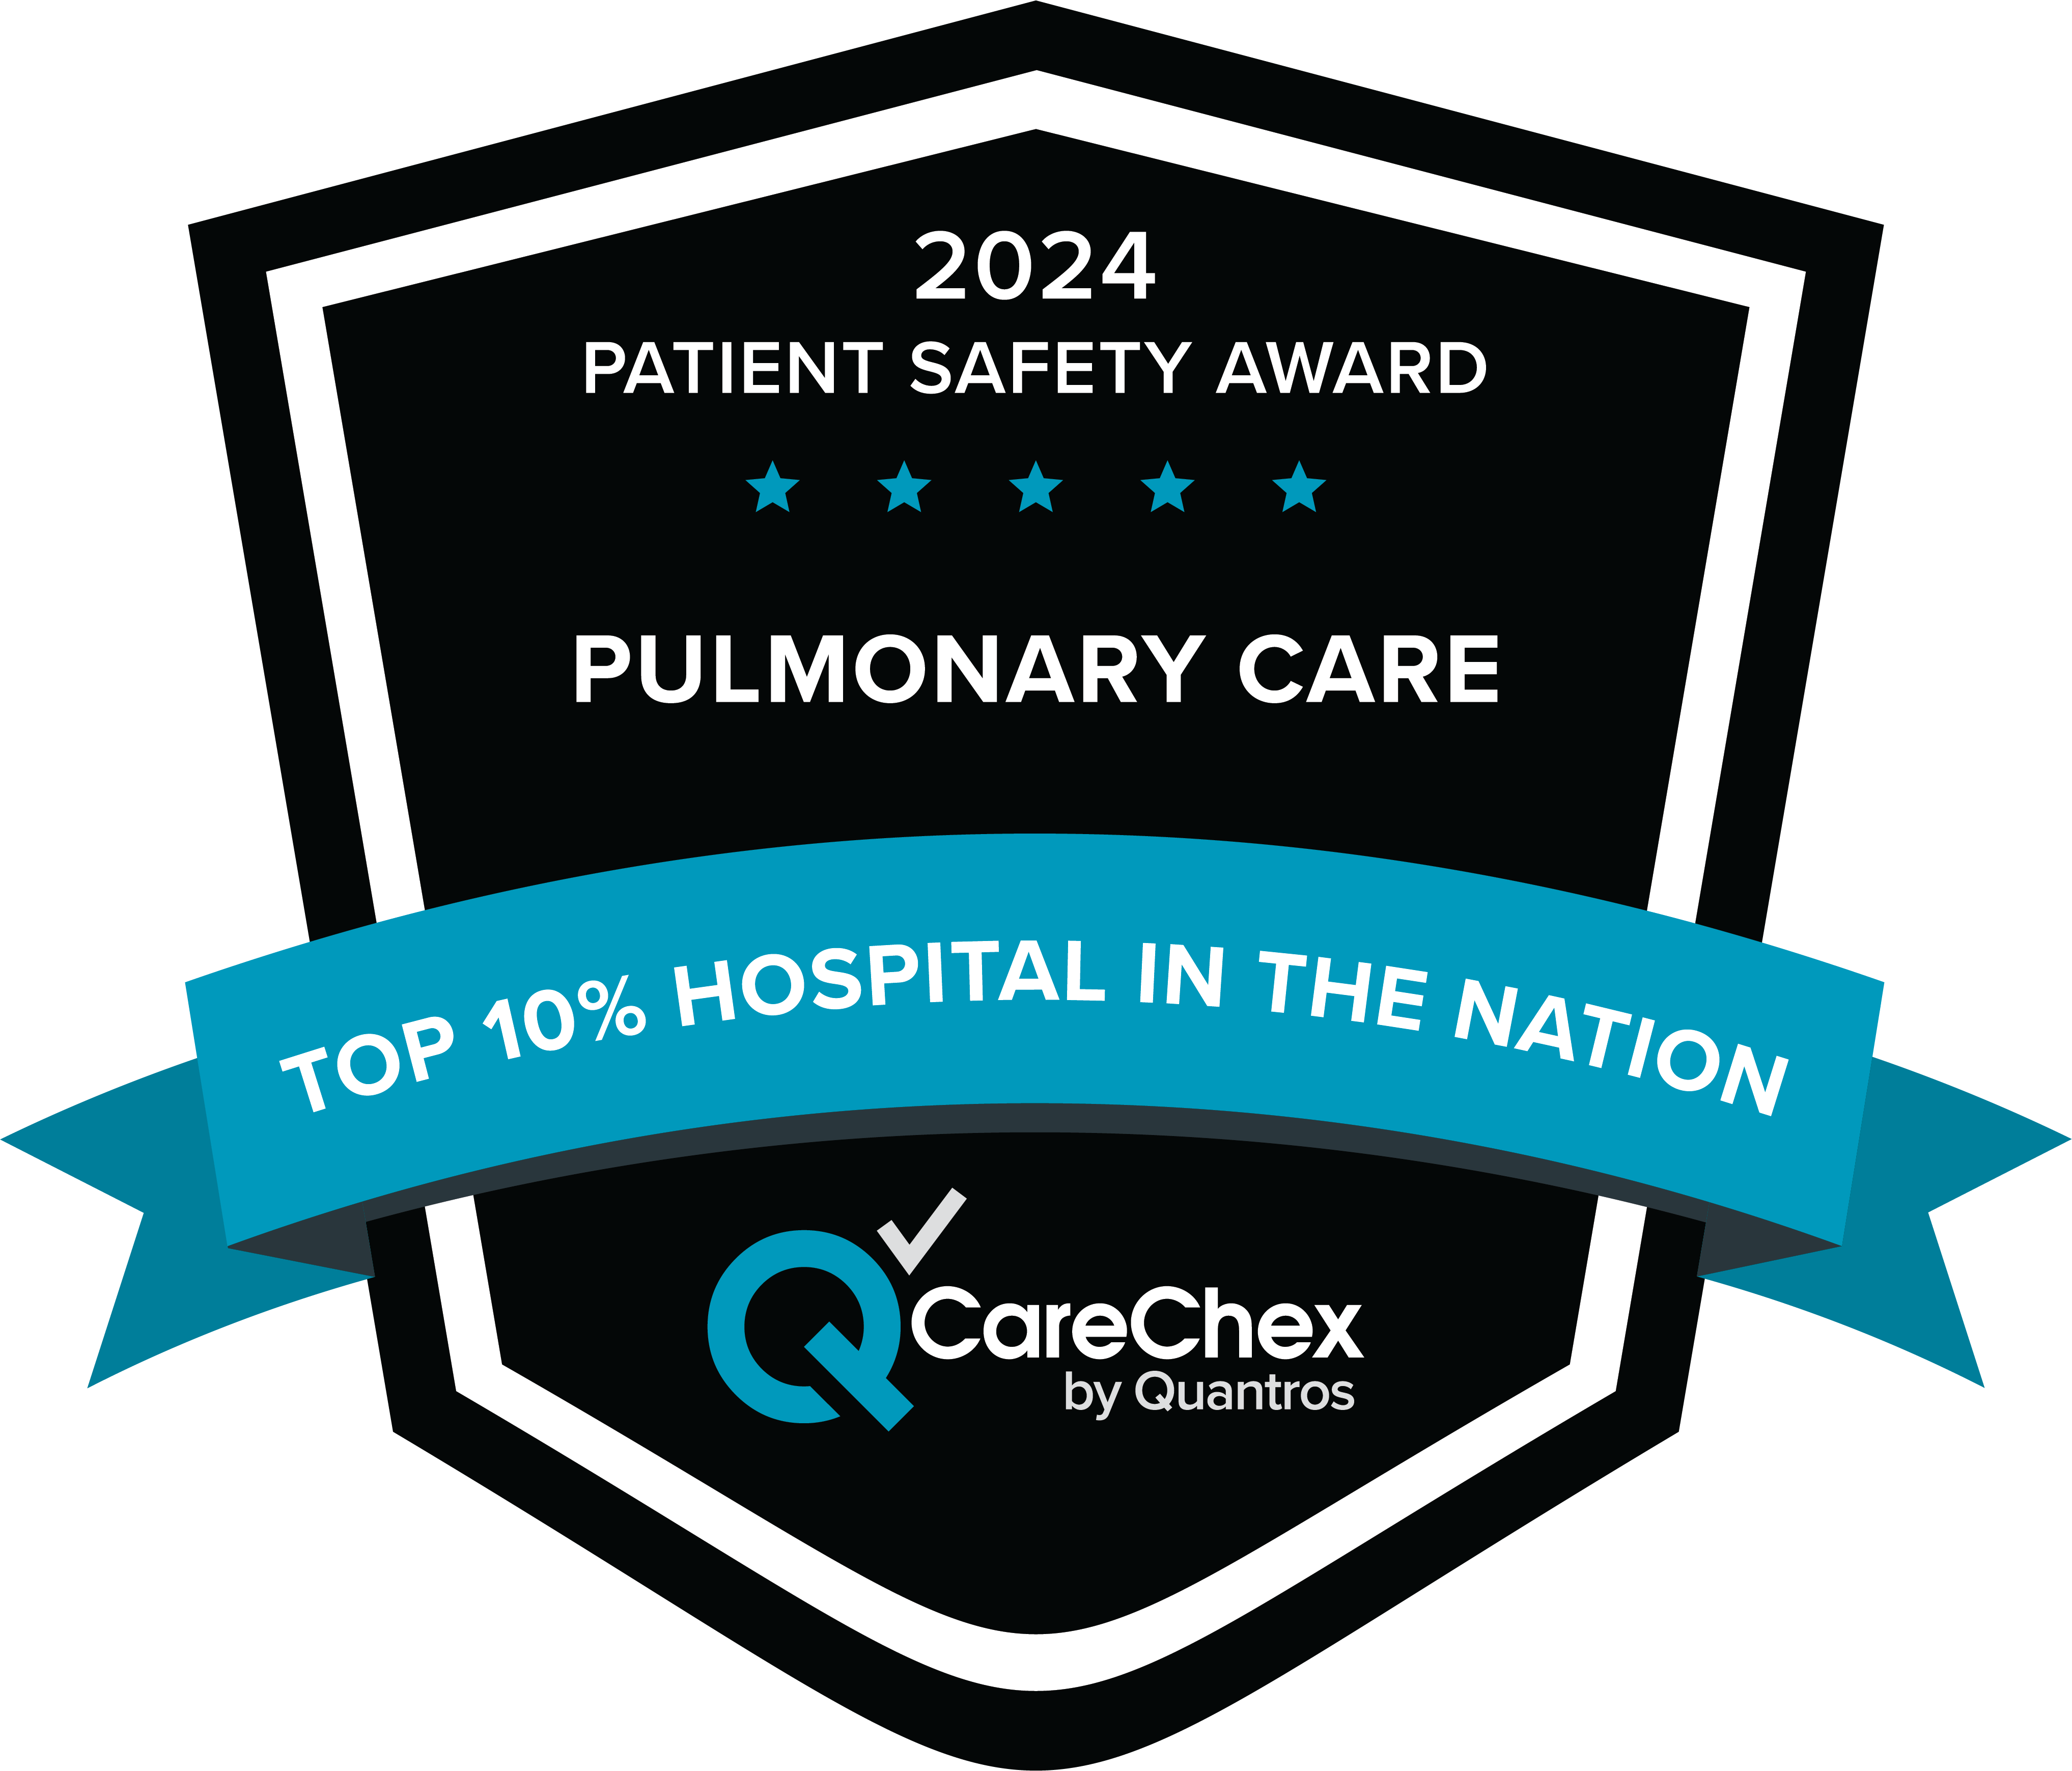 Awards badge for Top 10% Hospital in the Nation for Patient Safety in Pulmonary Care – 2024 CareChex by Quantros